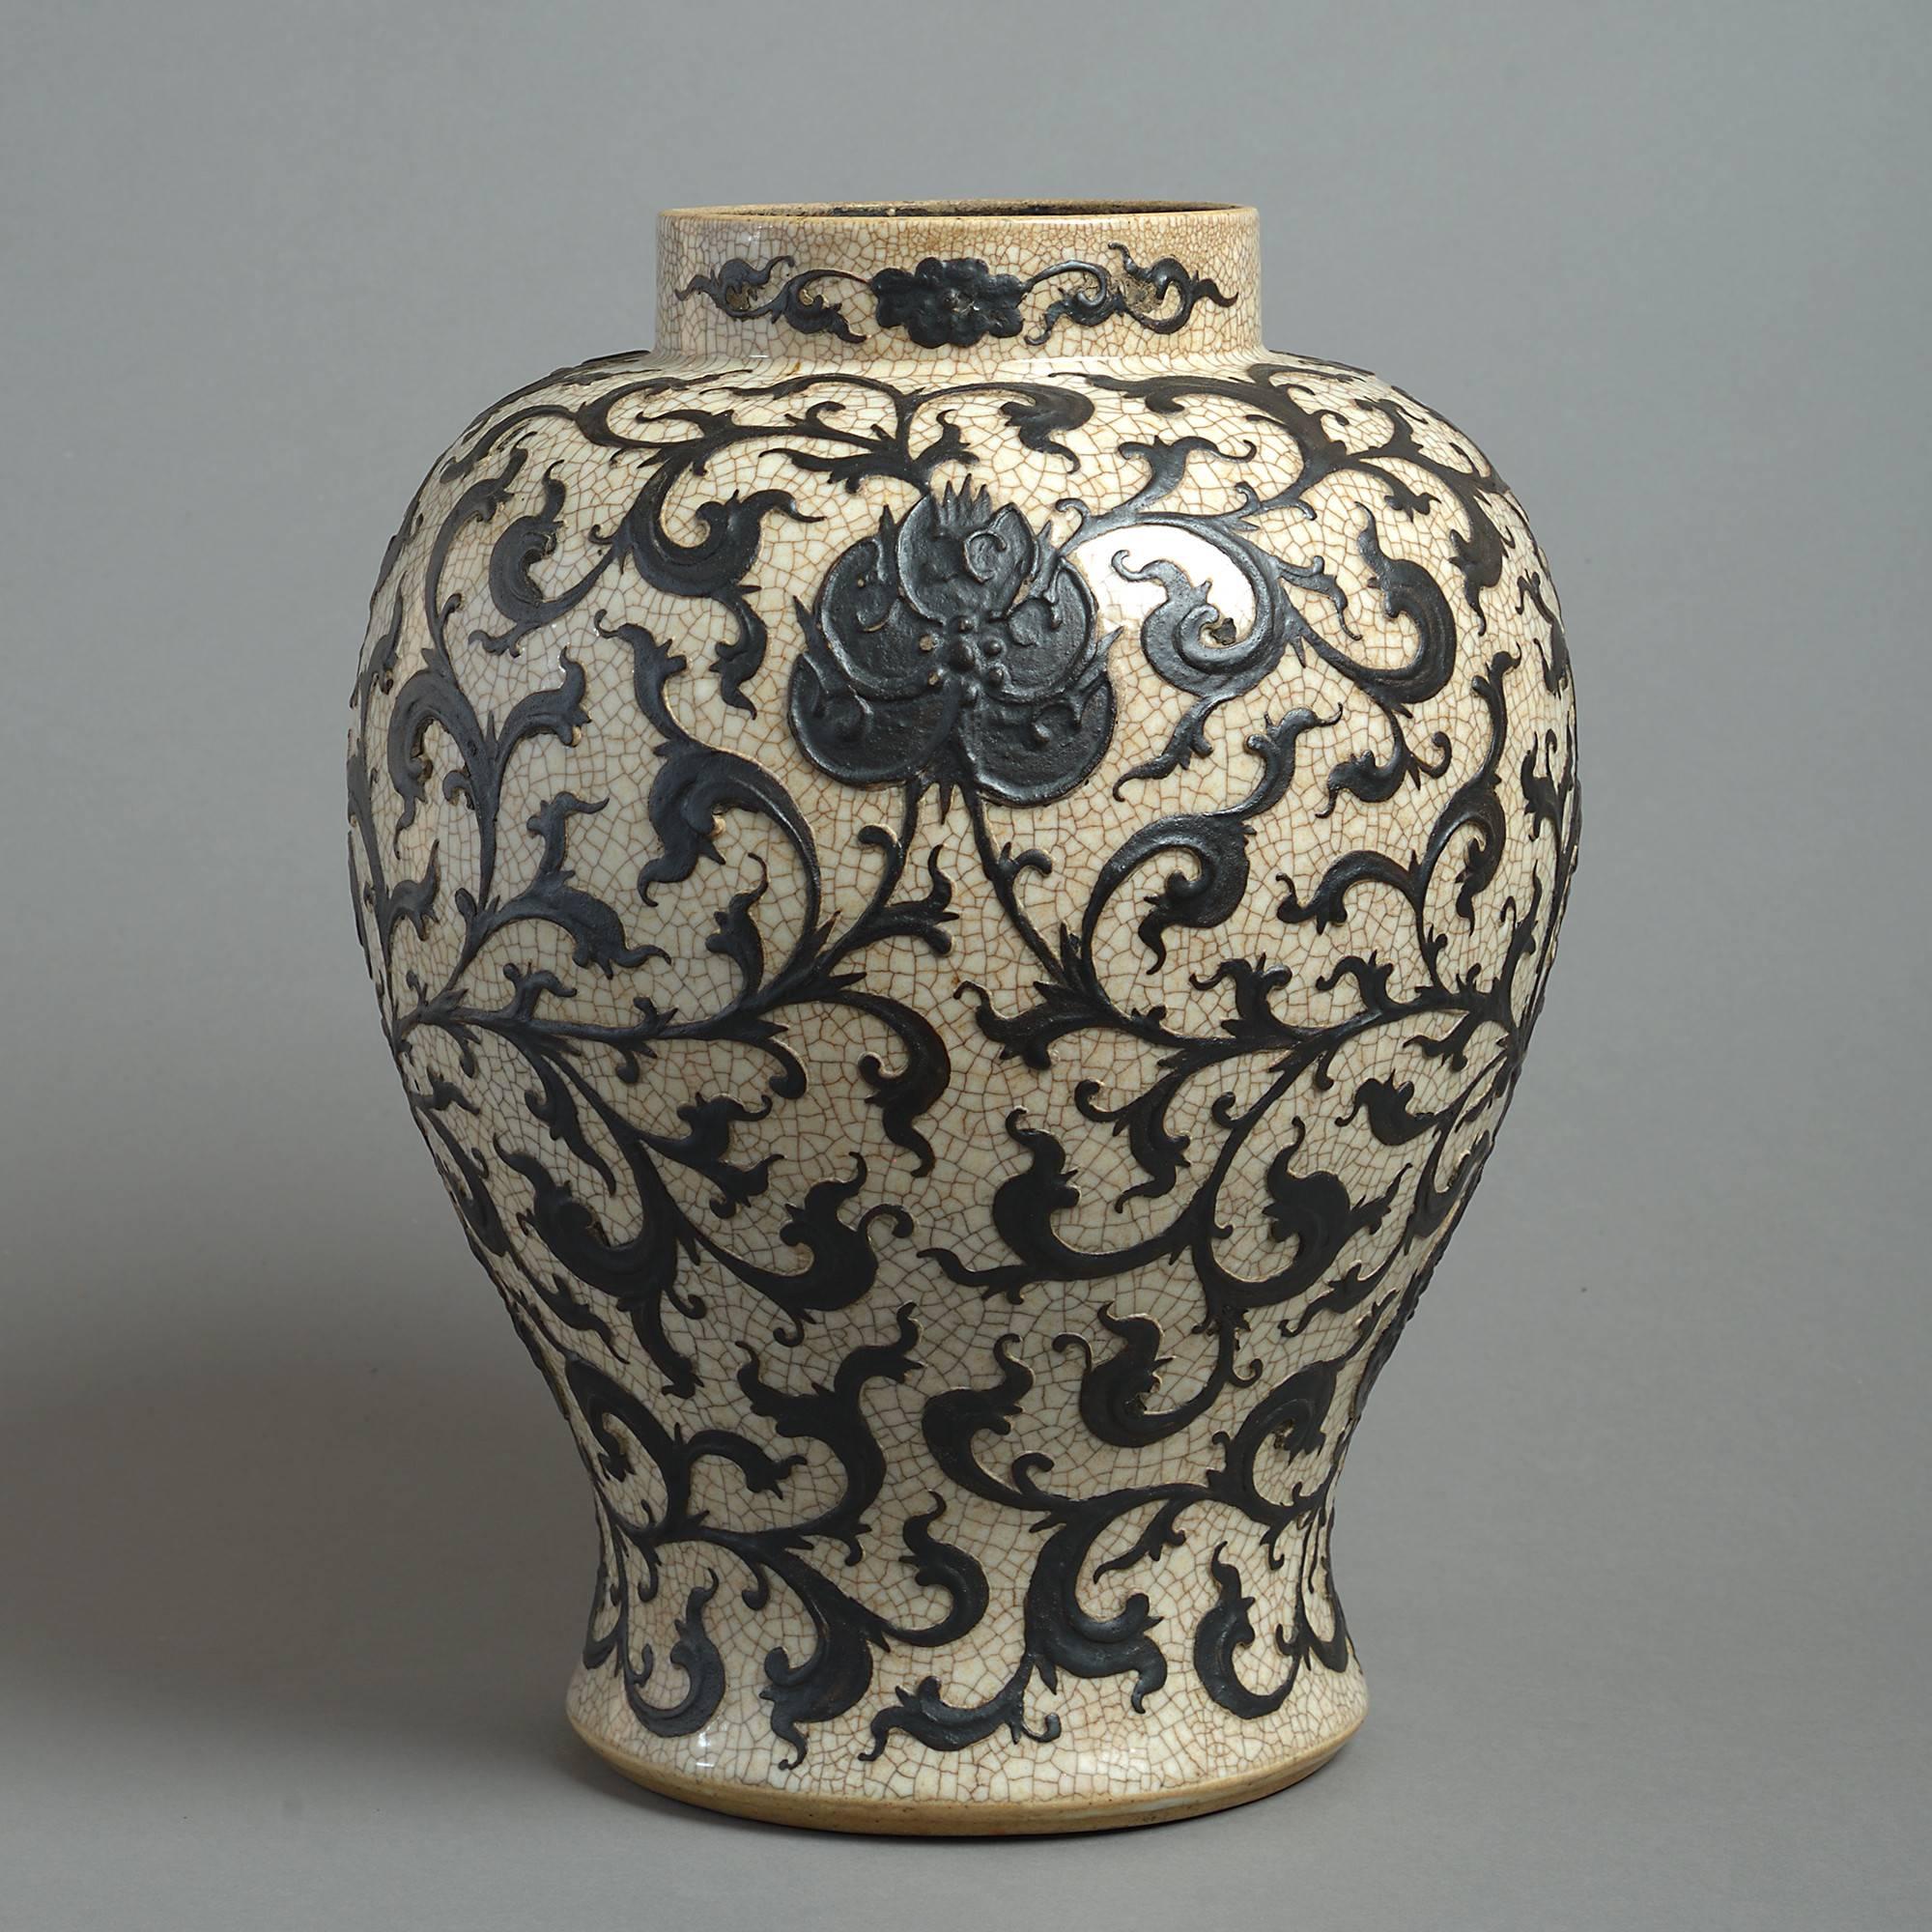 A late 19th century vase of baluster form with a cafe au lait crackle glaze and overlaid foliate decoration.